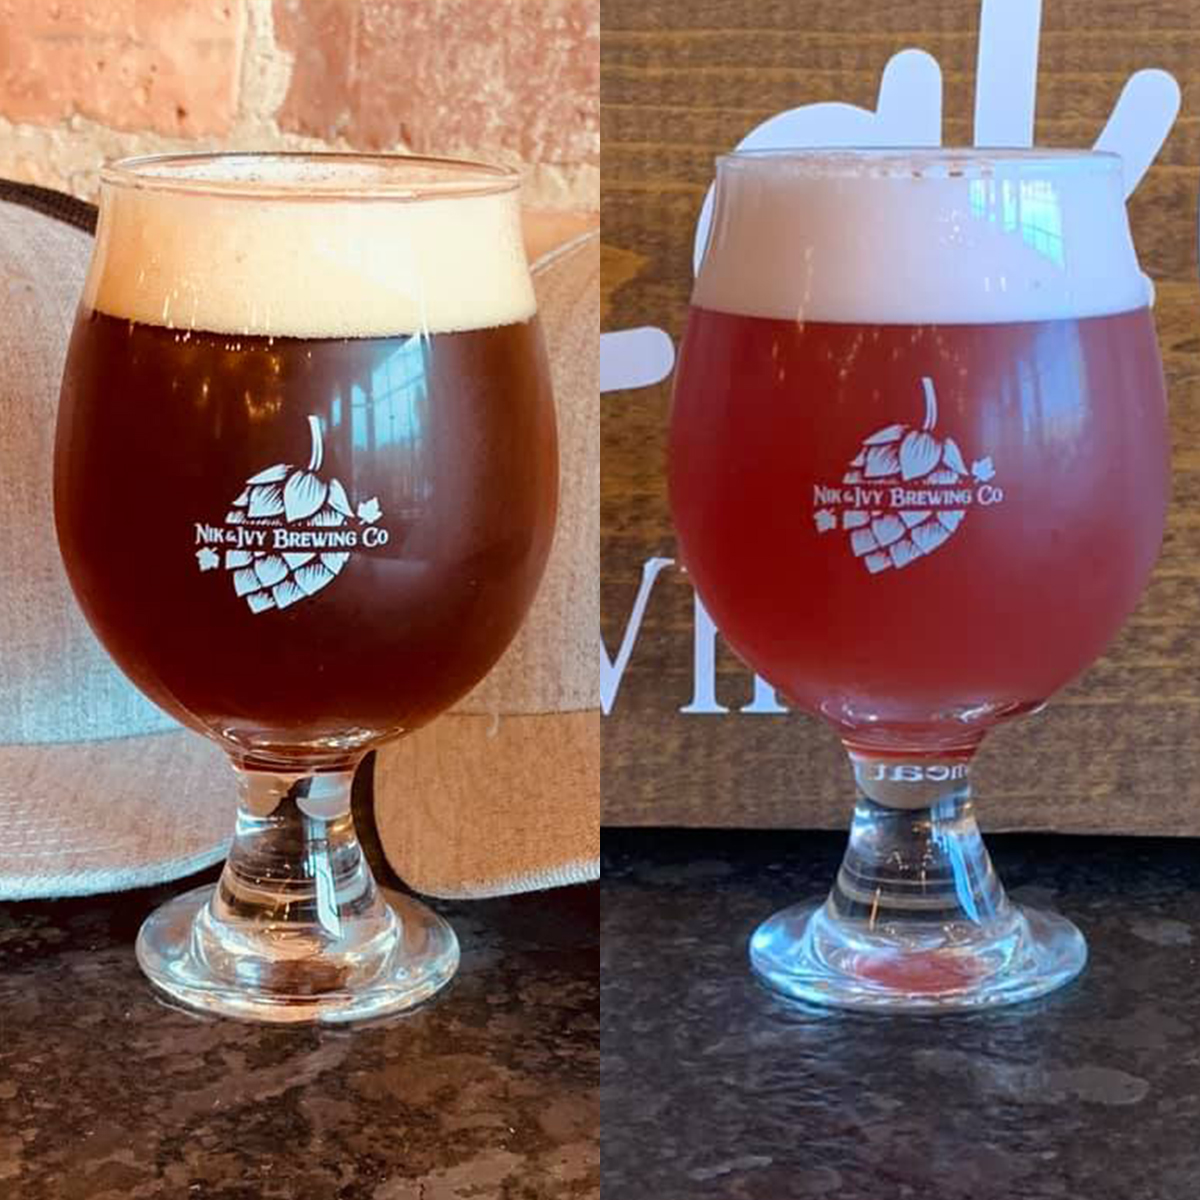 Two brews from Nik and Ivy Brewing in Lockport